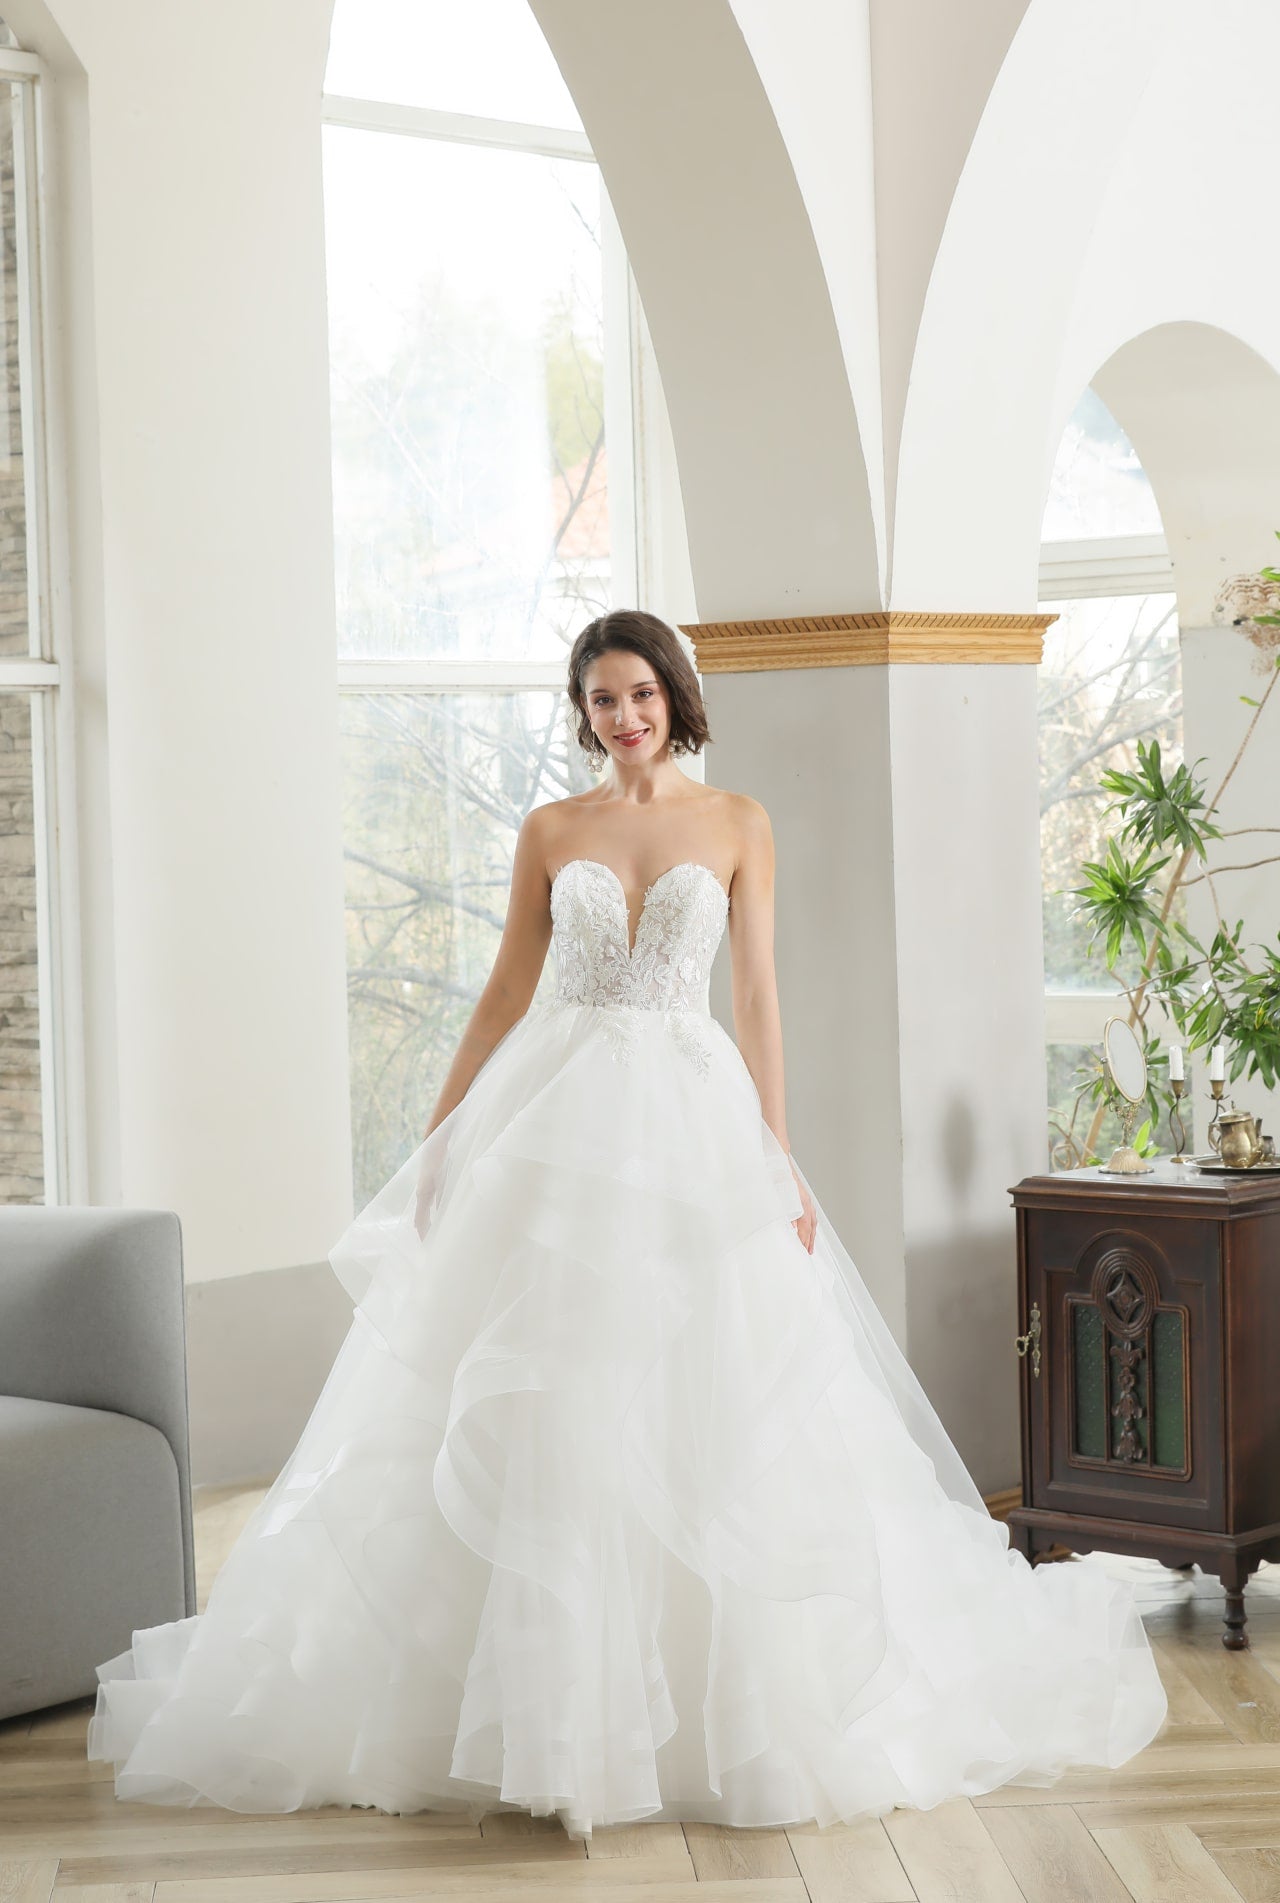 Tiered Skirt Floral Lace Ball Gown Wedding Dress